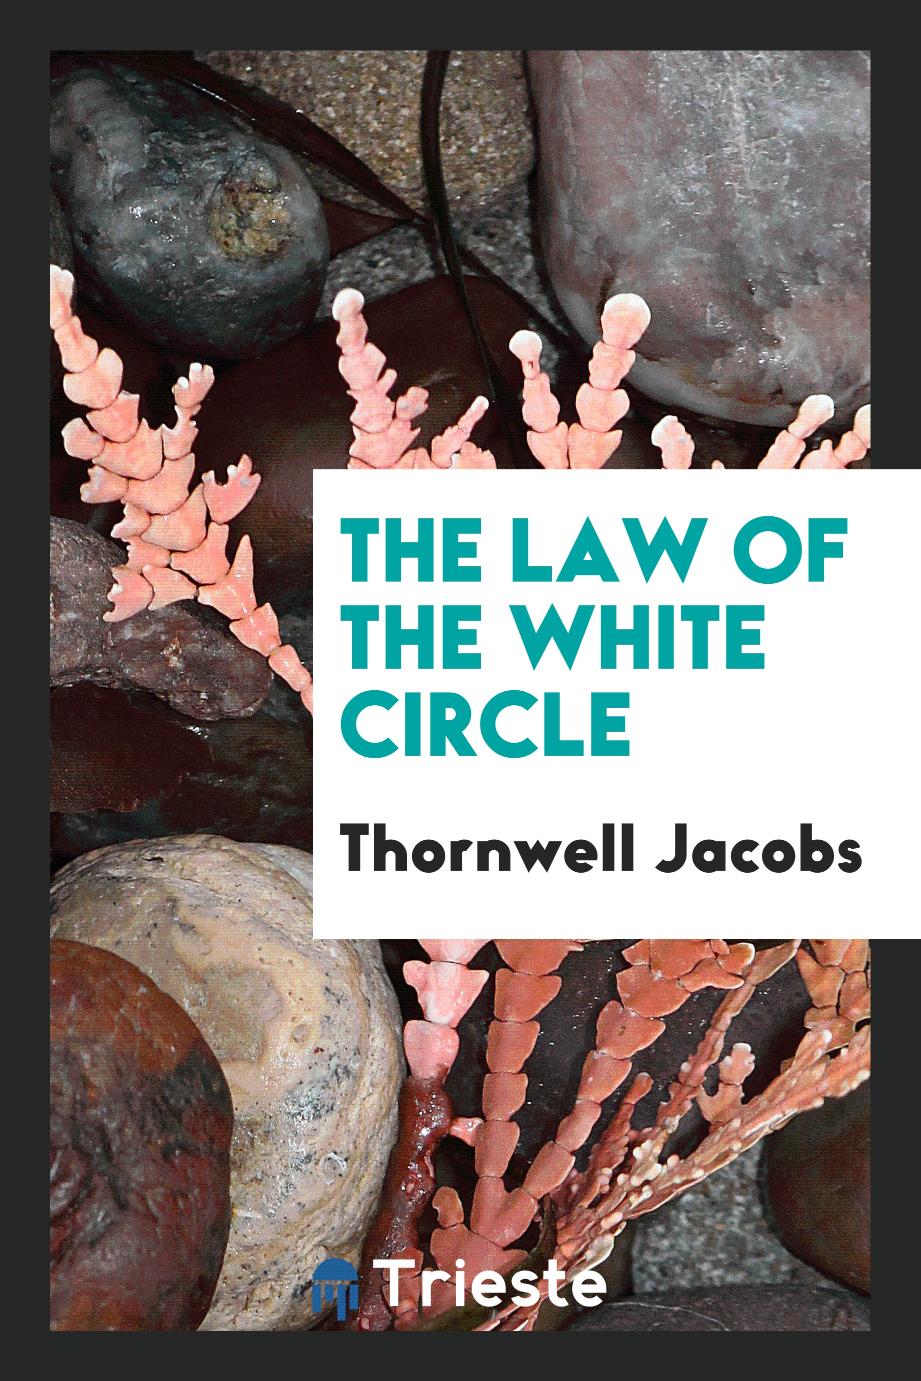 The law of the white circle